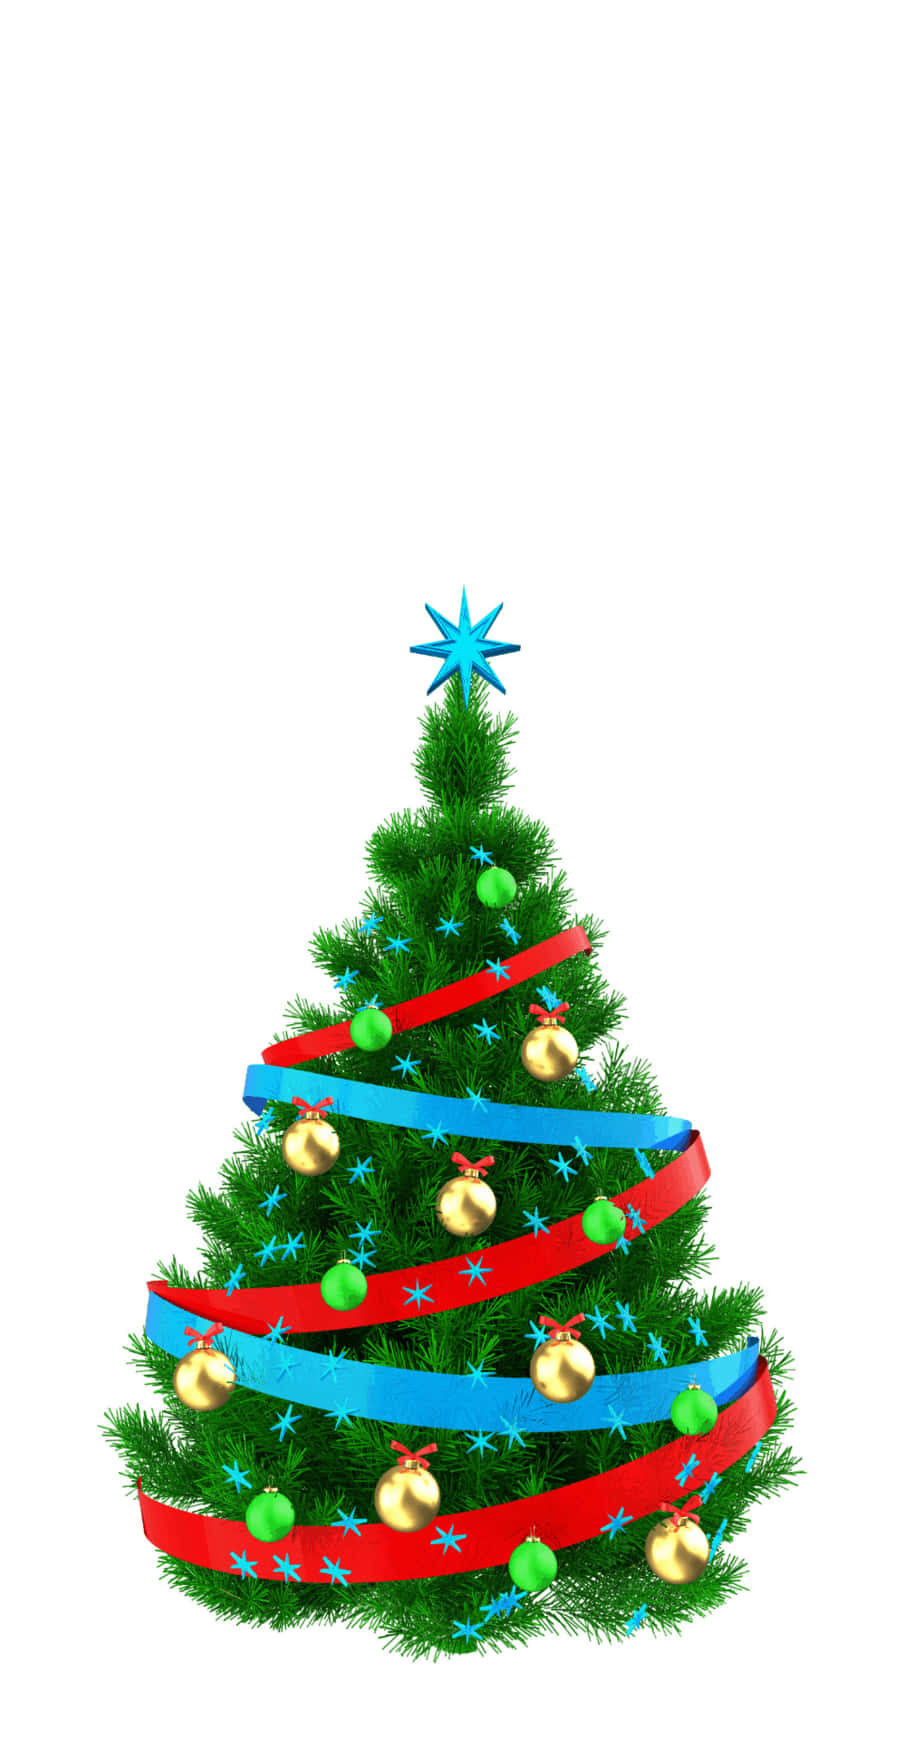 Cute Christmas Tree With Ribbons And Ornaments Wallpaper